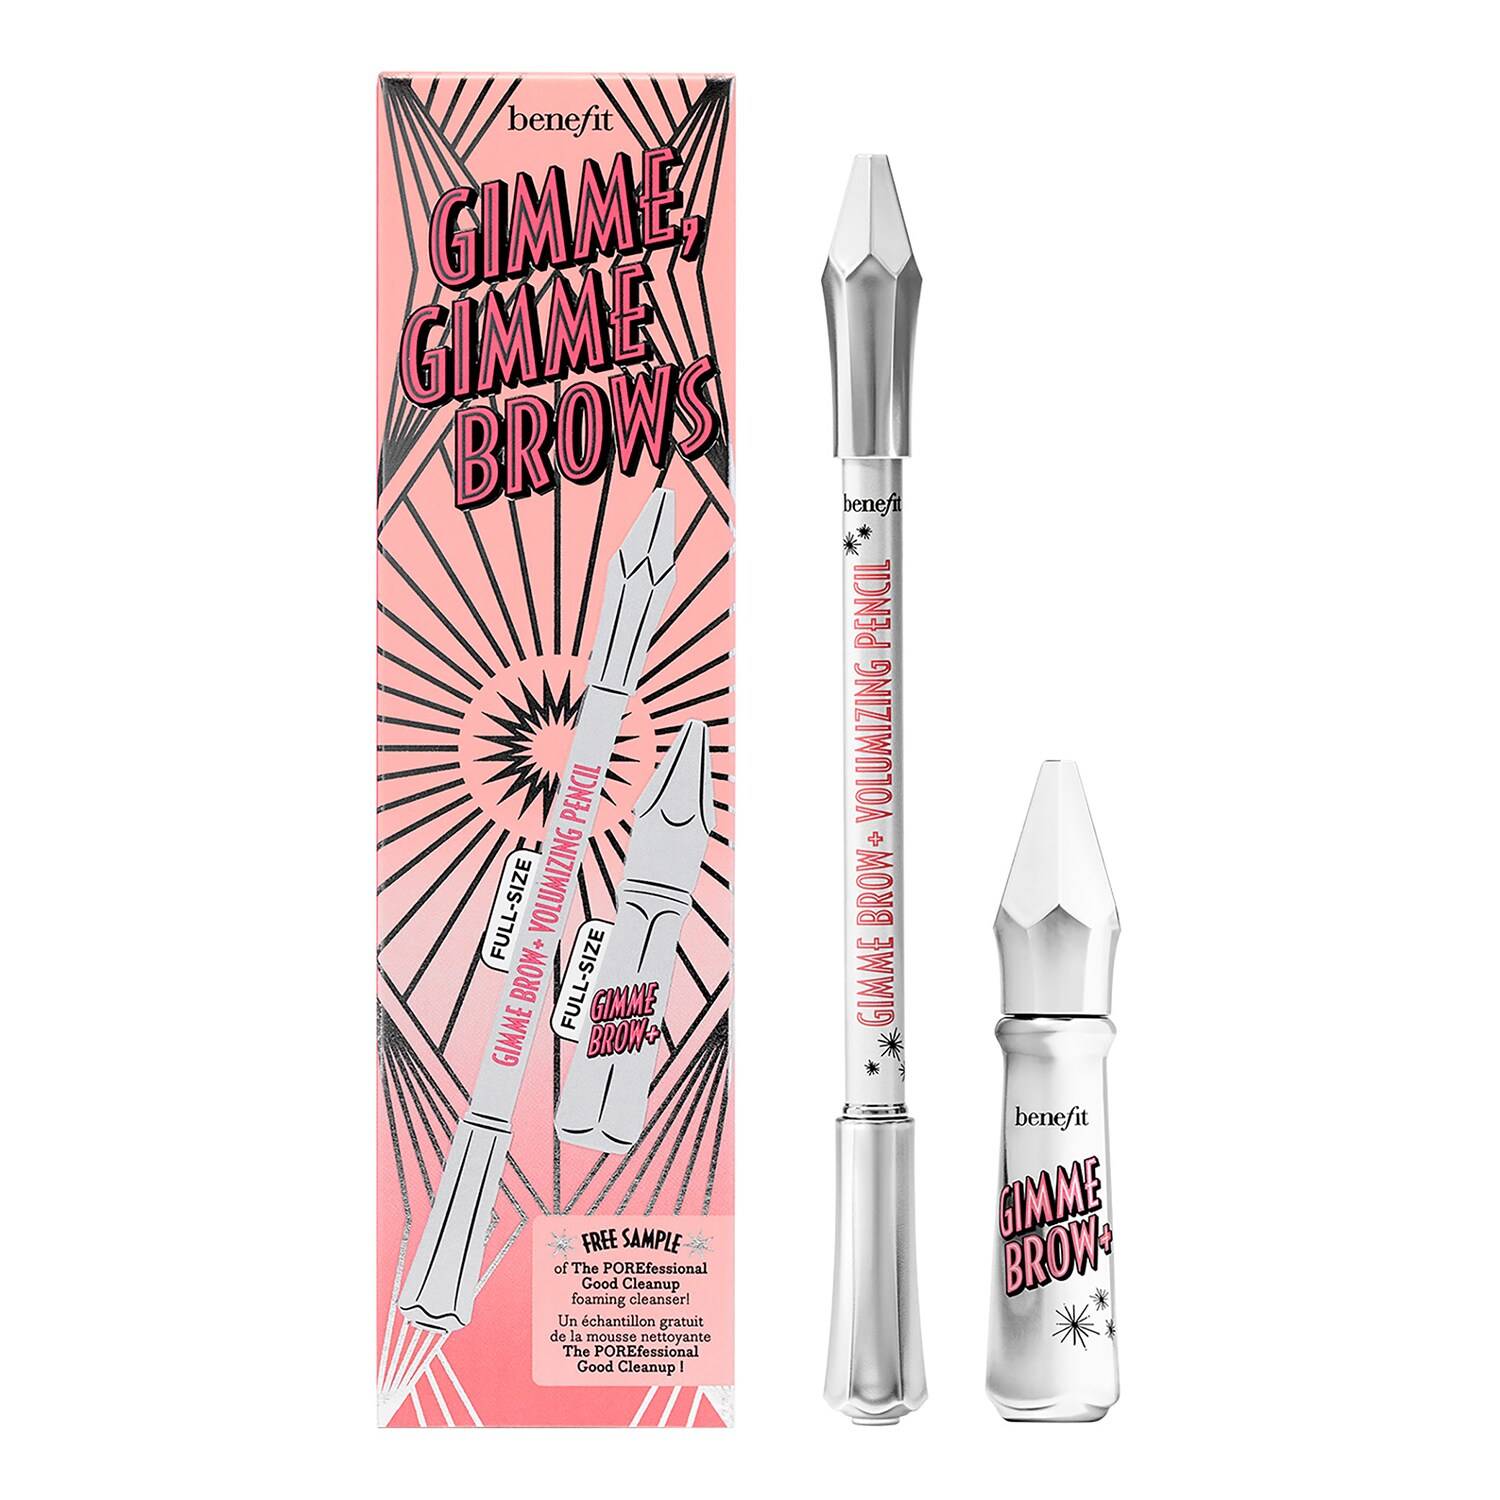 Benefit Cosmetics Gimme, Gimme Brows Set 3 Warm Light Brown